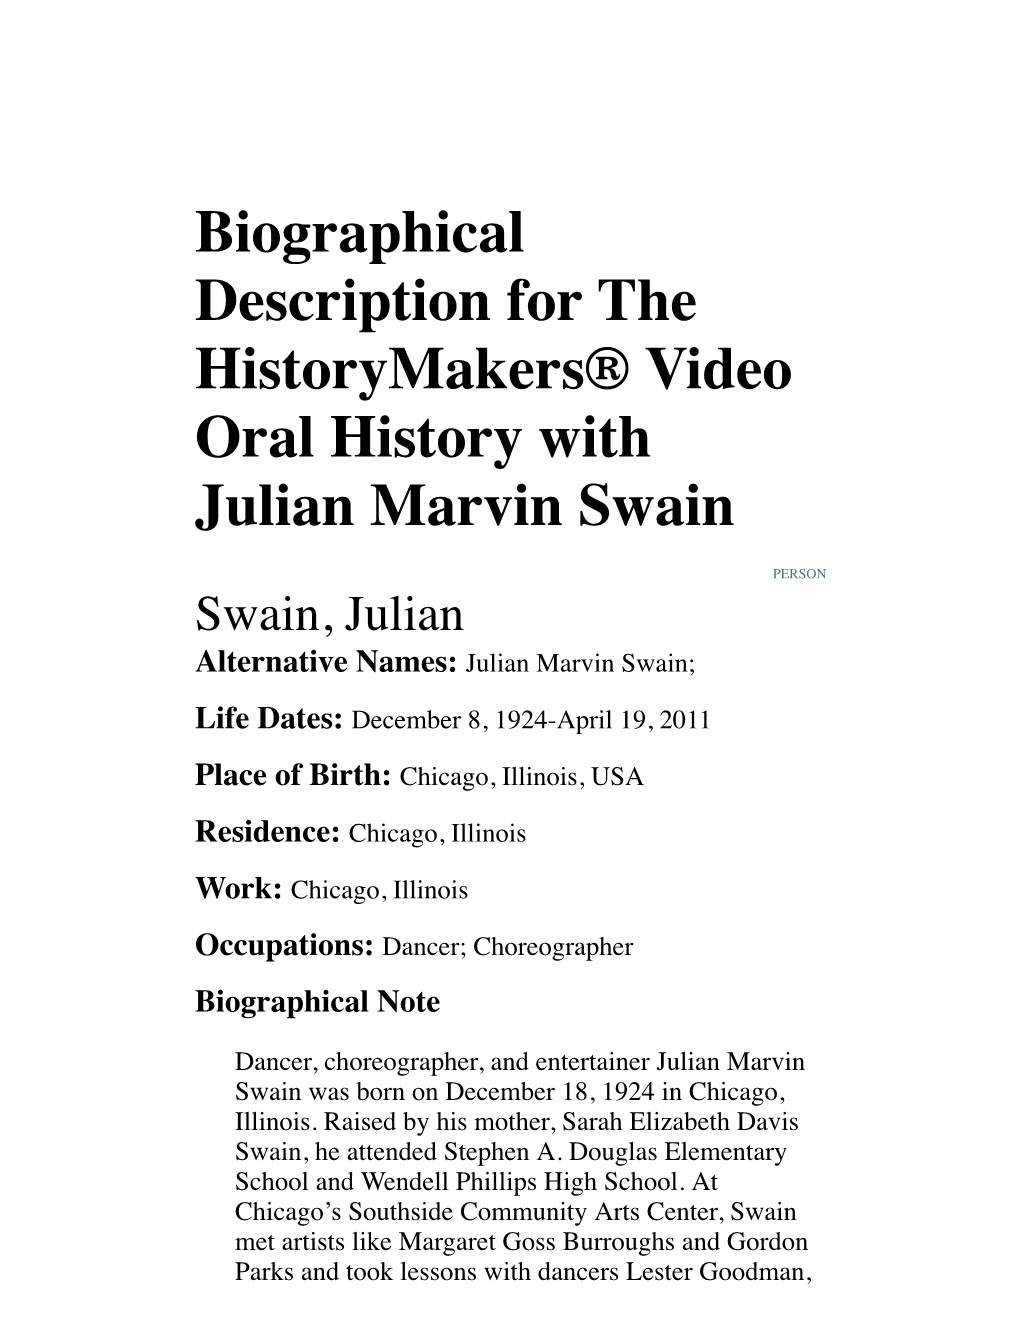 Biographical Description for the Historymakers® Video Oral History with Julian Marvin Swain